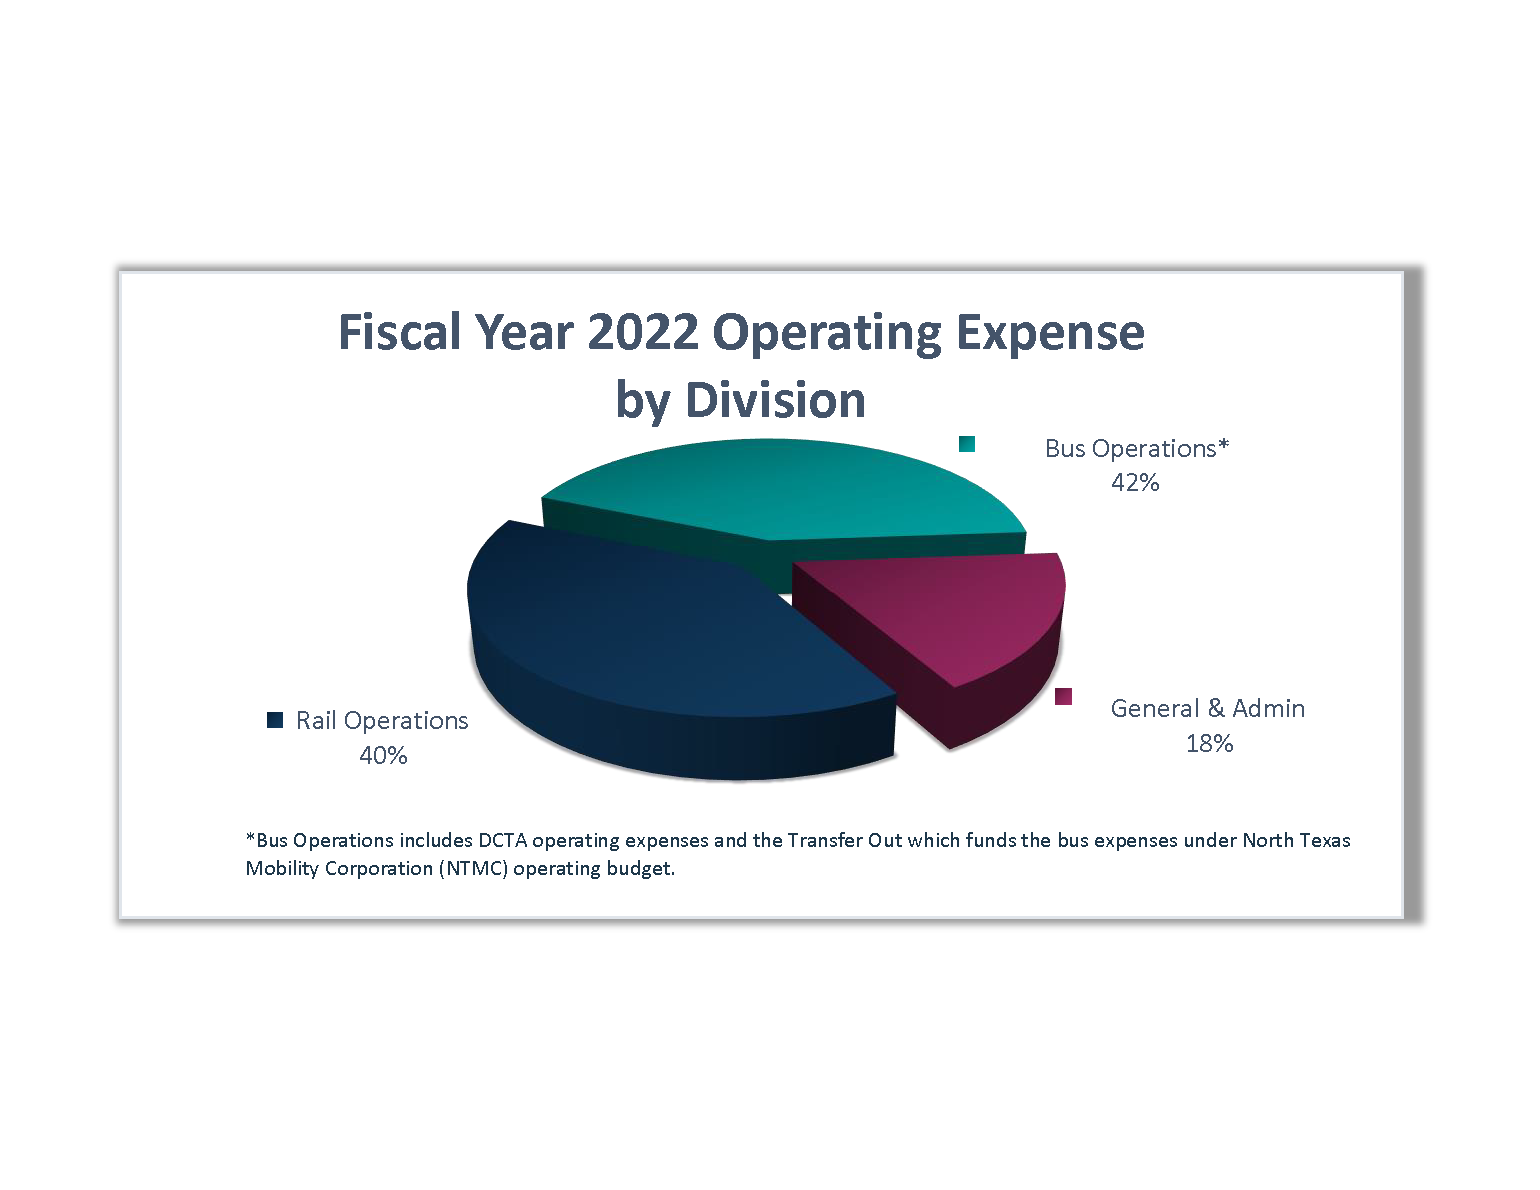 FY22 Operating Expense by Division